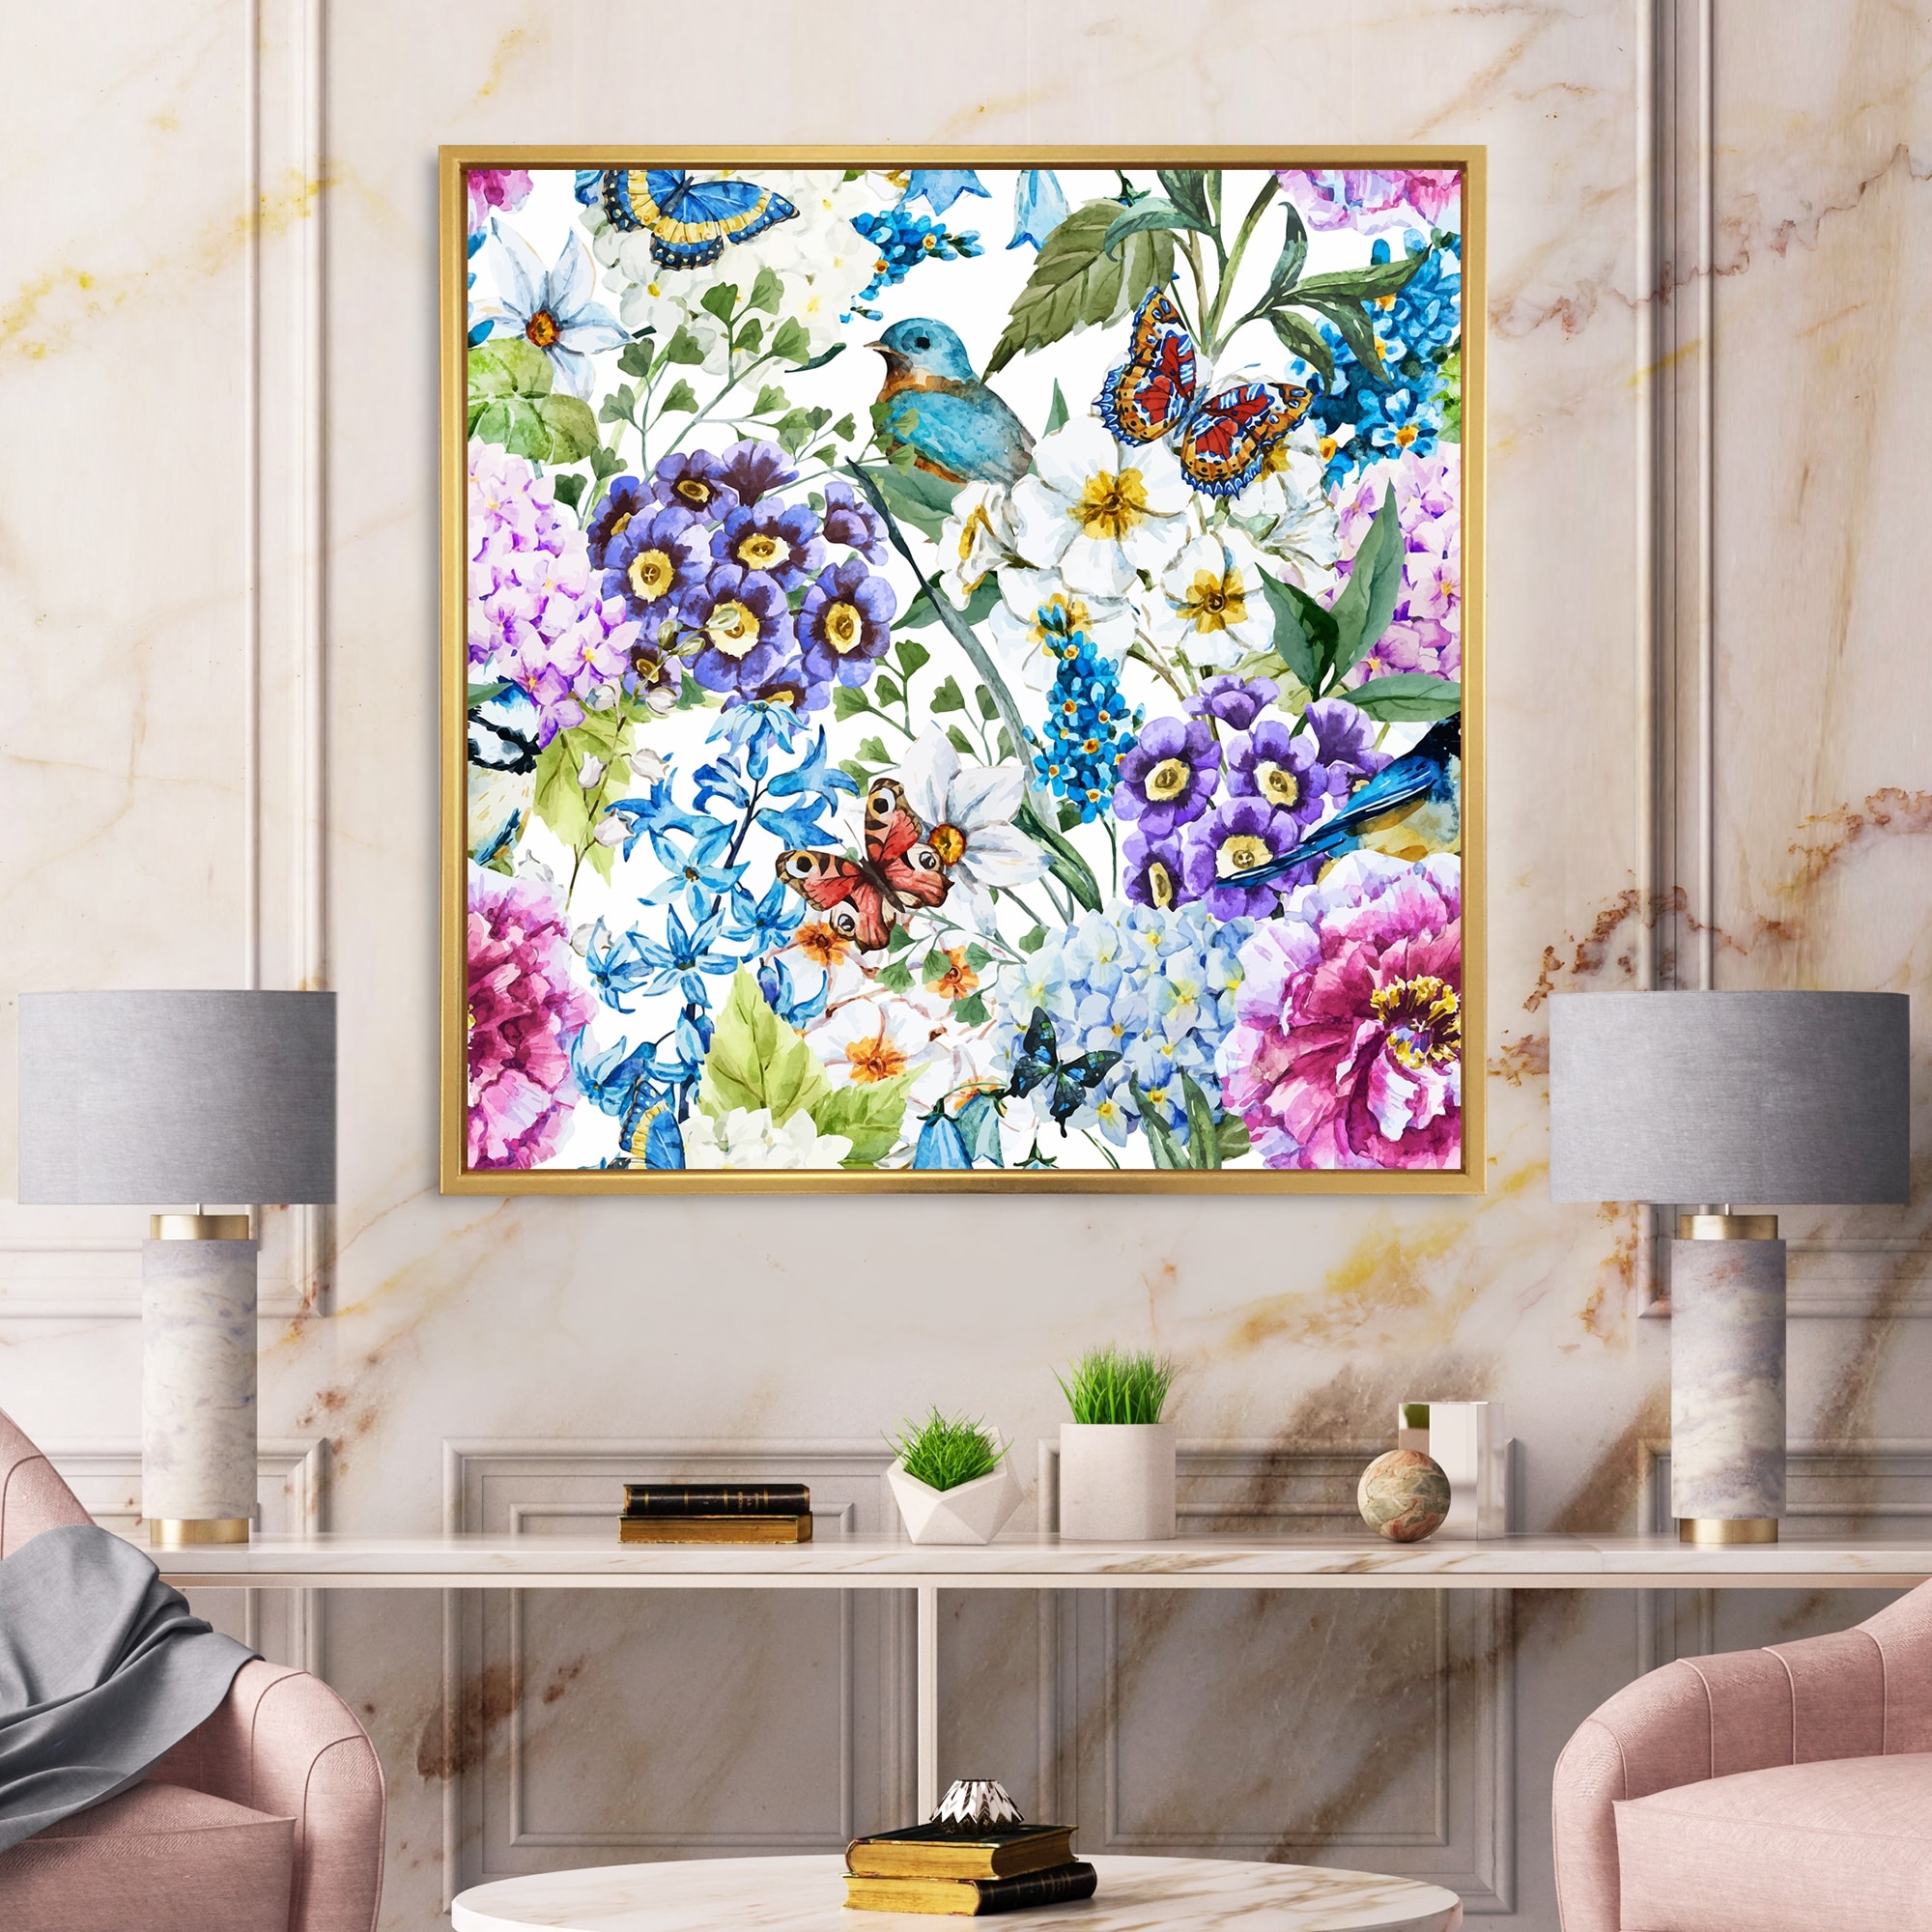 Designart 'Vibrant Wild Spring Leaves and Wildflowers XII' Modern Framed Canvas Wall Art Print